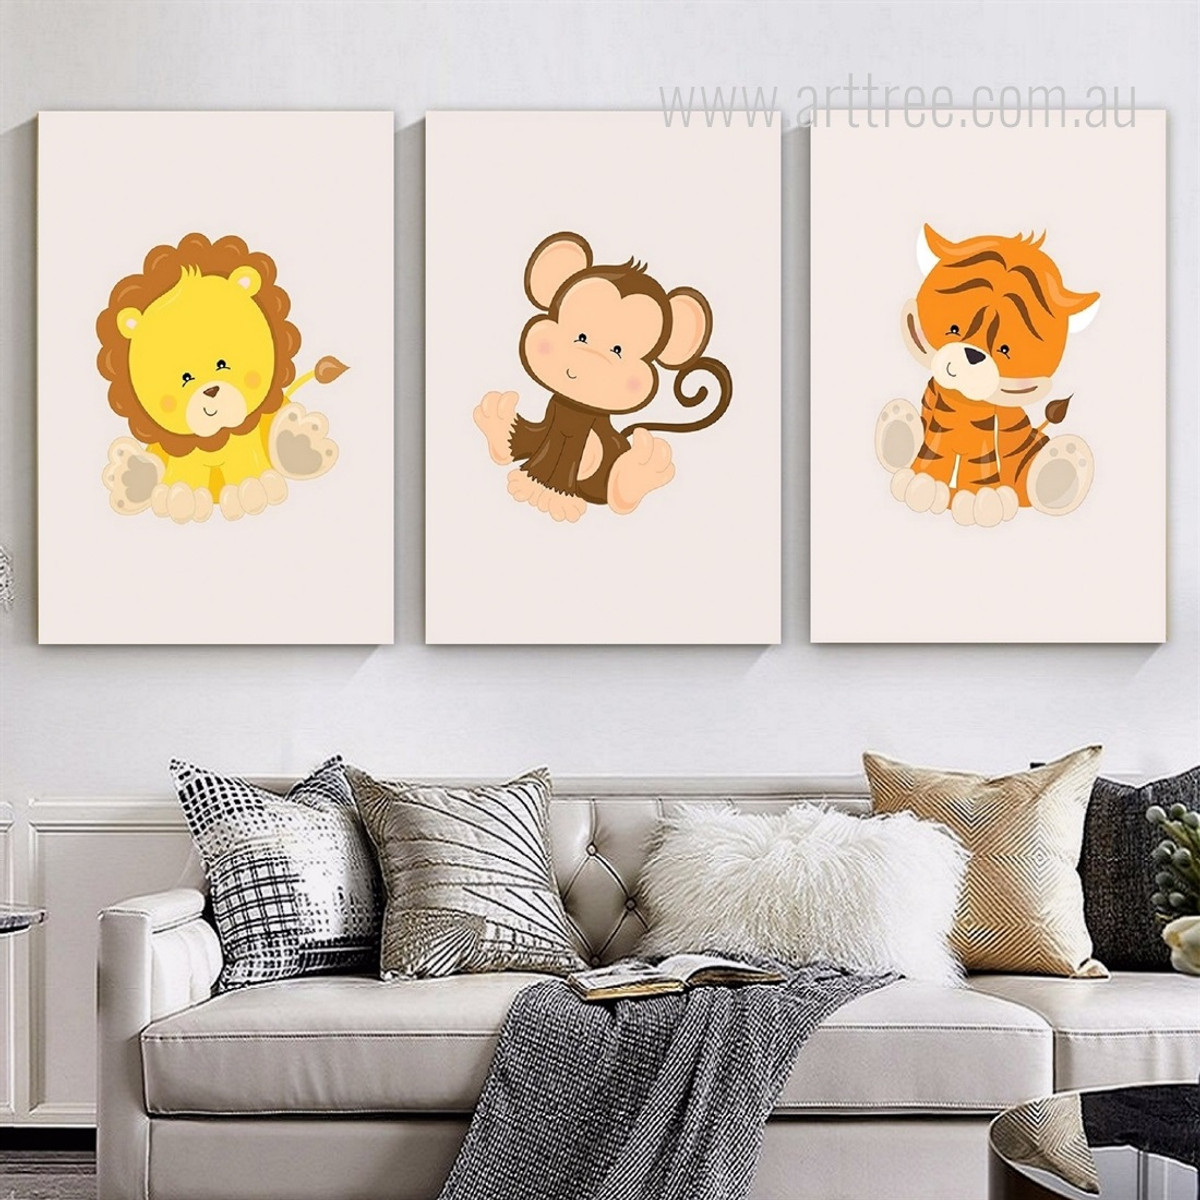 Cute Wild King And Monkey Minimalist Nursery Photograph Animal 3 Piece Set Stretched Canvas Print for Room Wall Art Drape